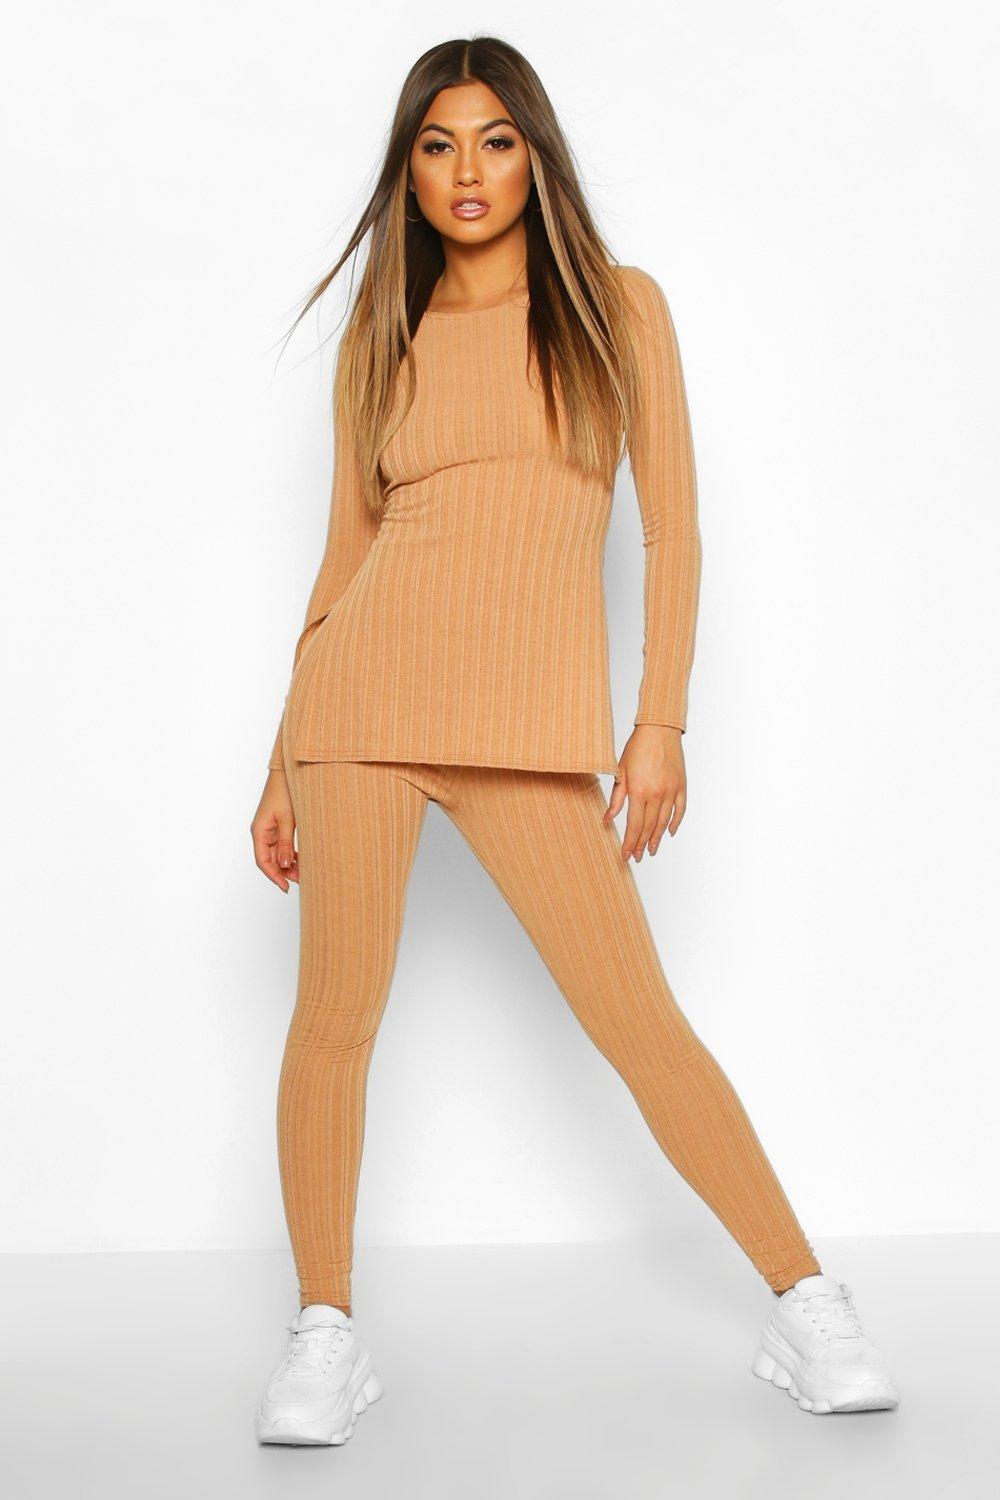 Ribbed Leggings And Crop Top Co Ord Set Beige